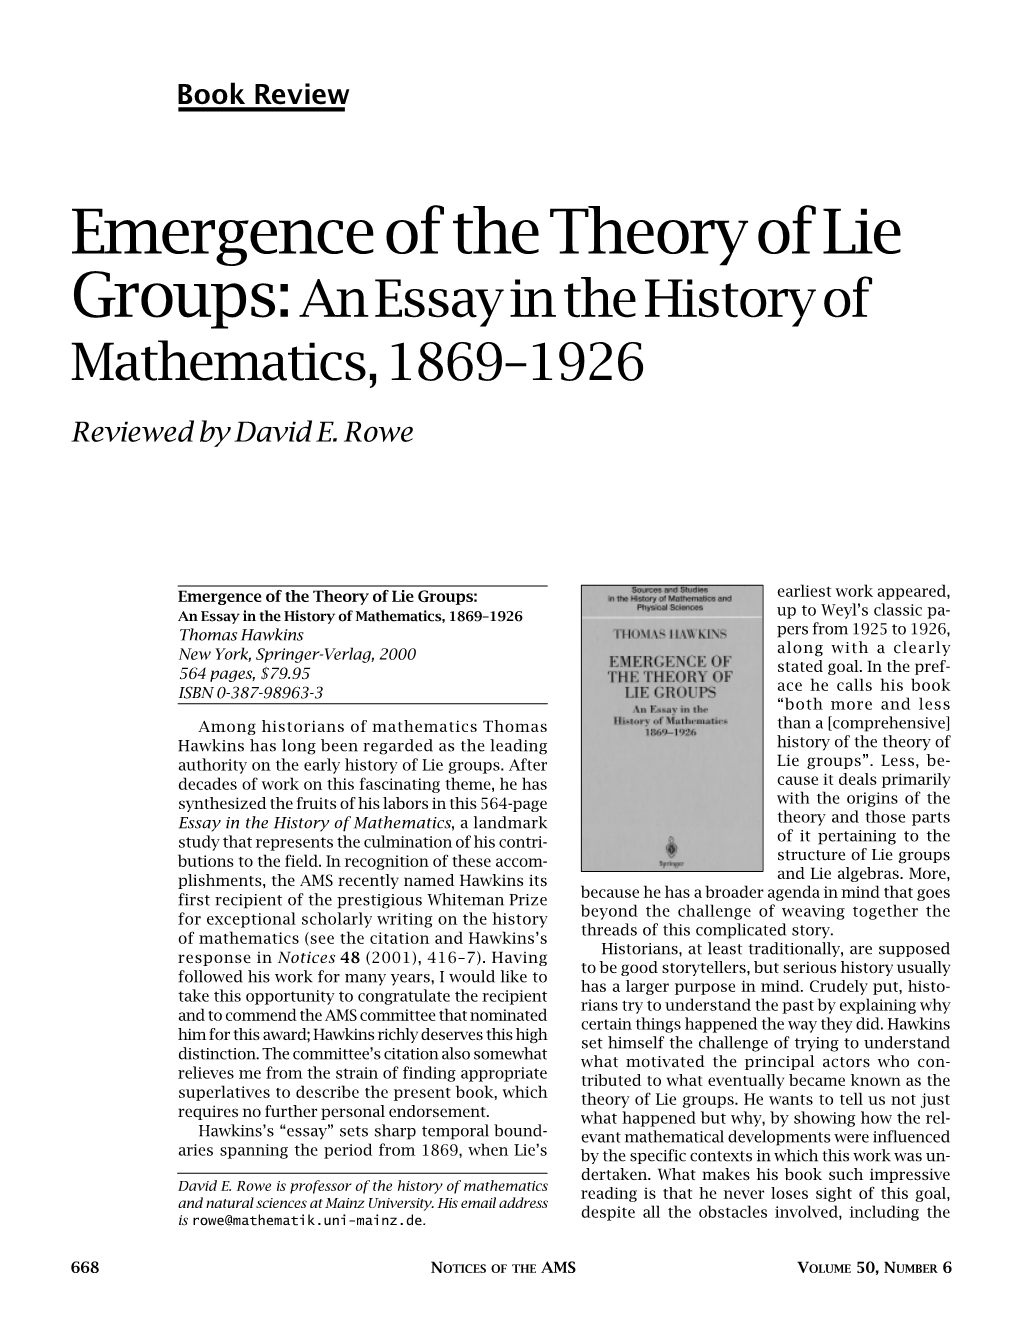 Book Review: Emergence of the Theory of Lie Groups: an Essay In